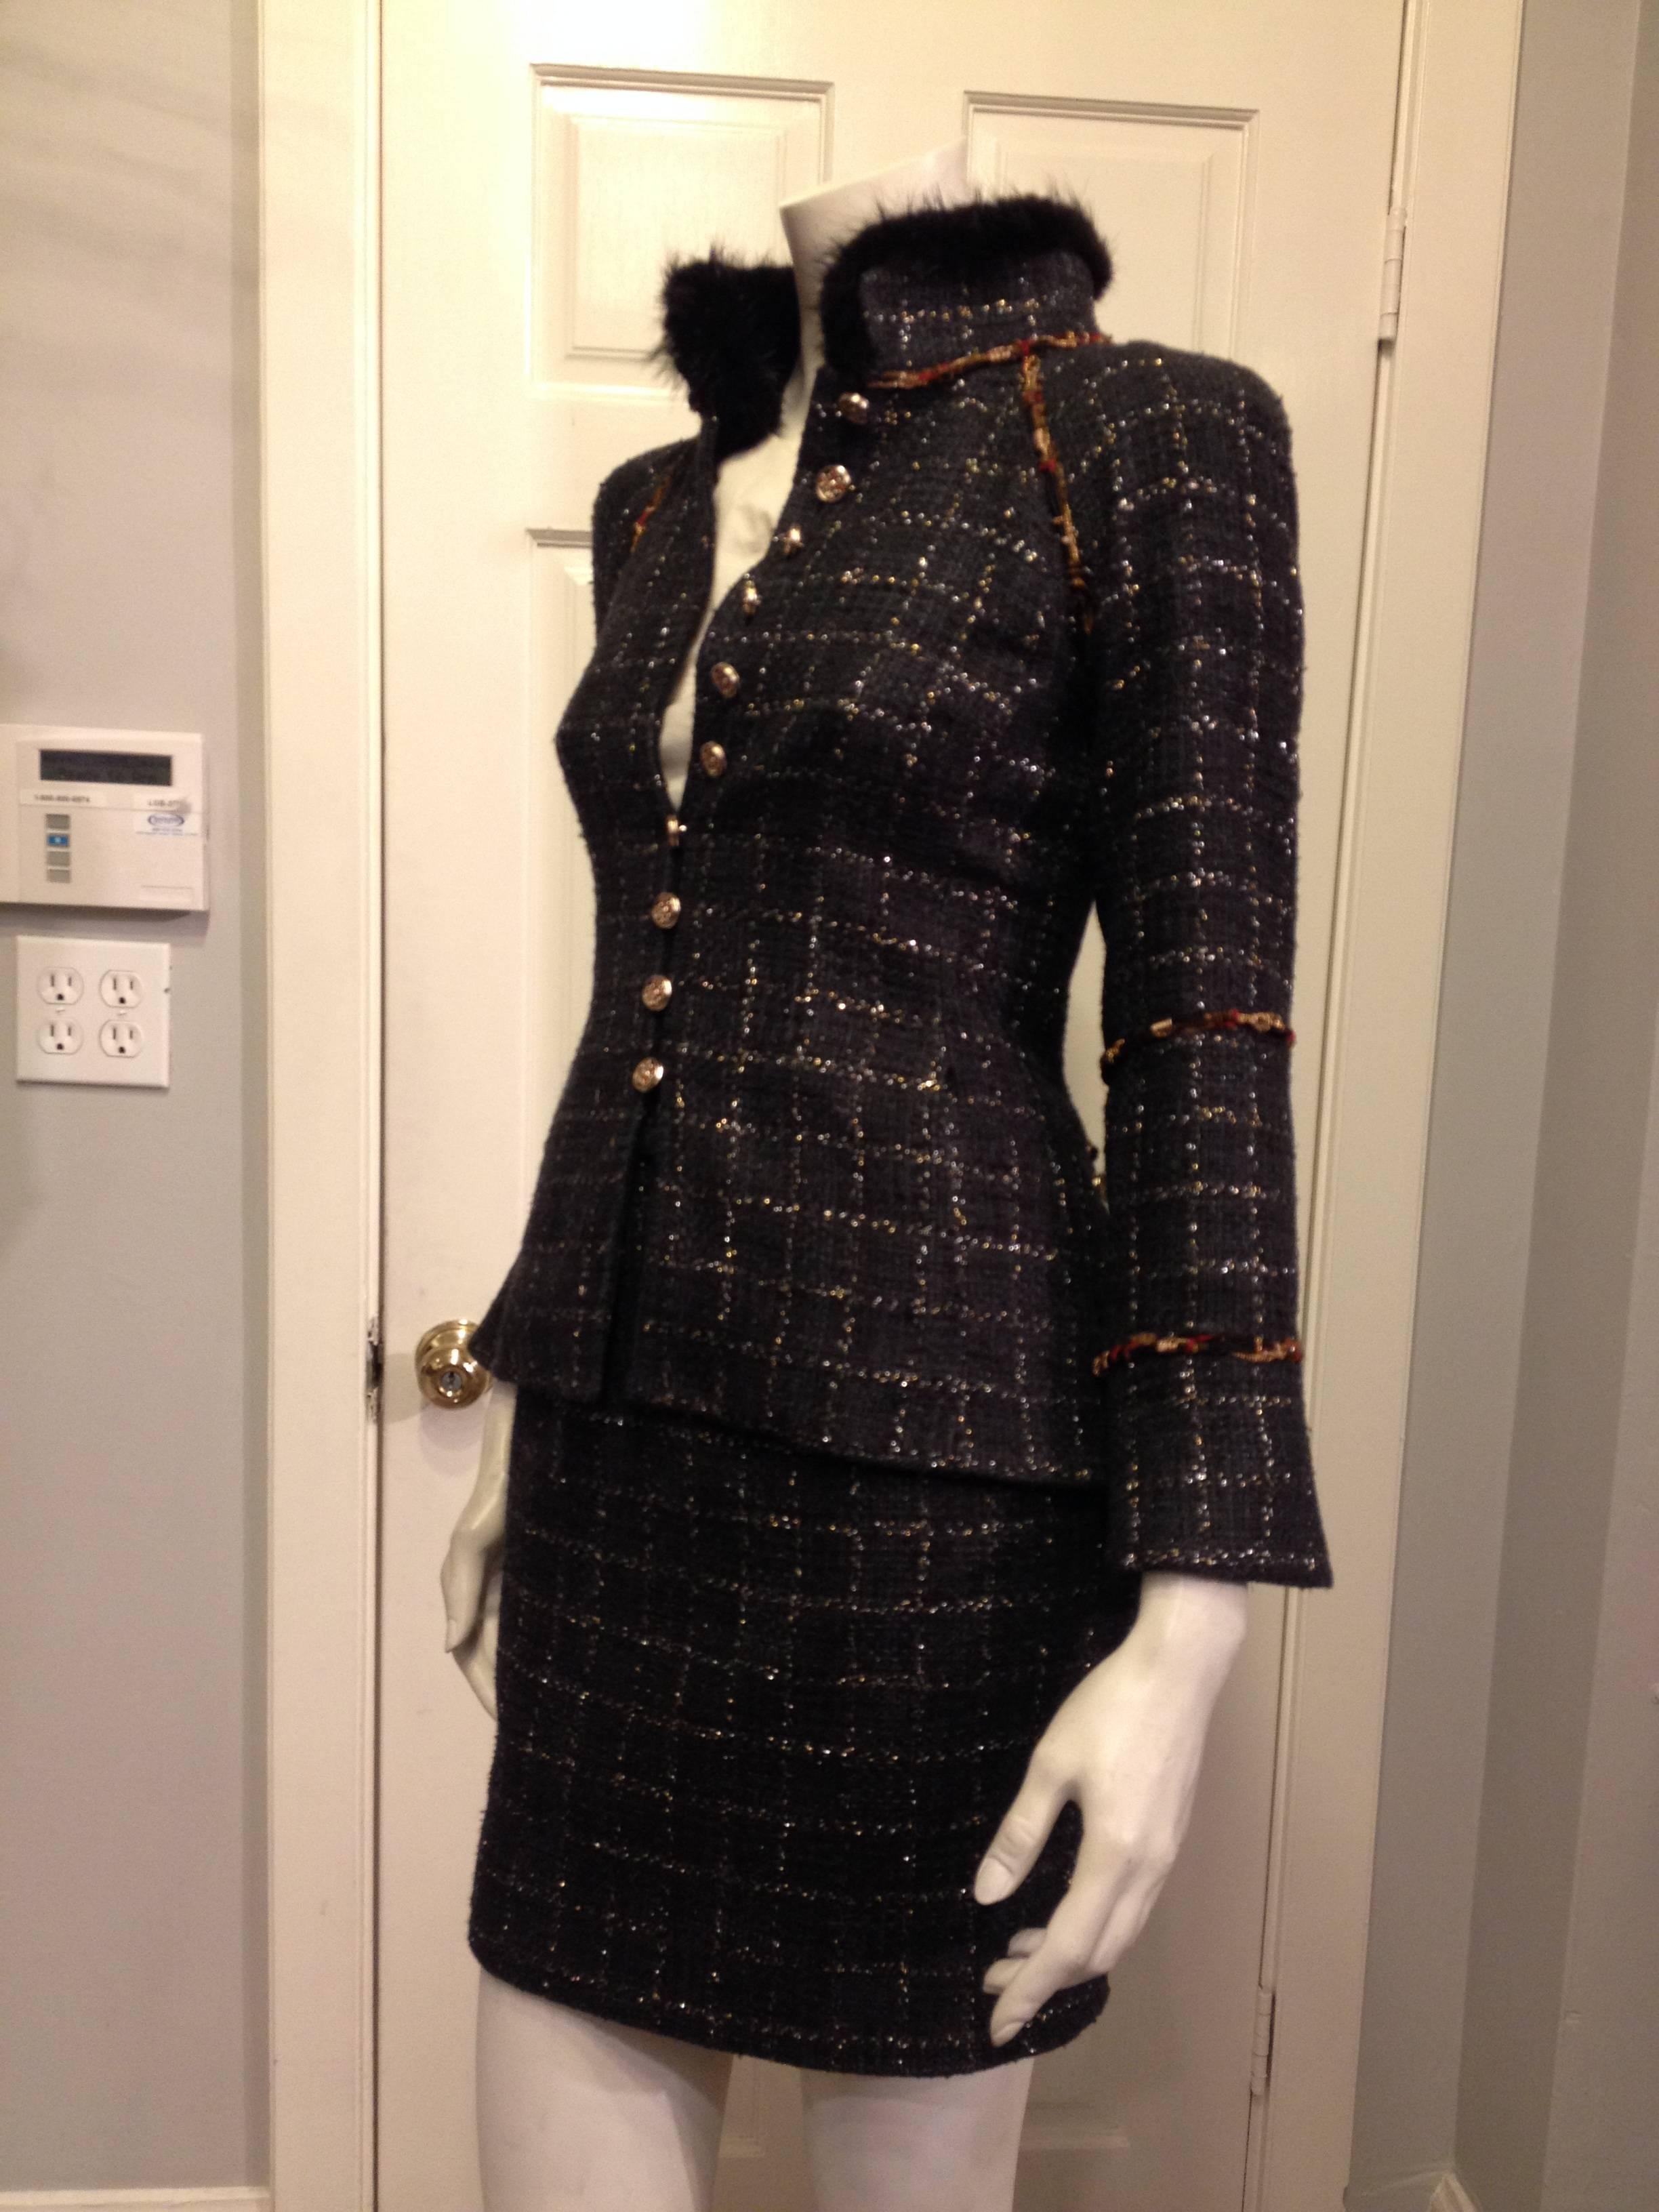 How dramatic and unexpected - this Chanel suit is everything you could want. Gorgeous dark ocean blue tweed is flecked with delicate shiny silver windowpane pattern, while the jacket is decorated with a lovely cord trim in shades of black, copper,